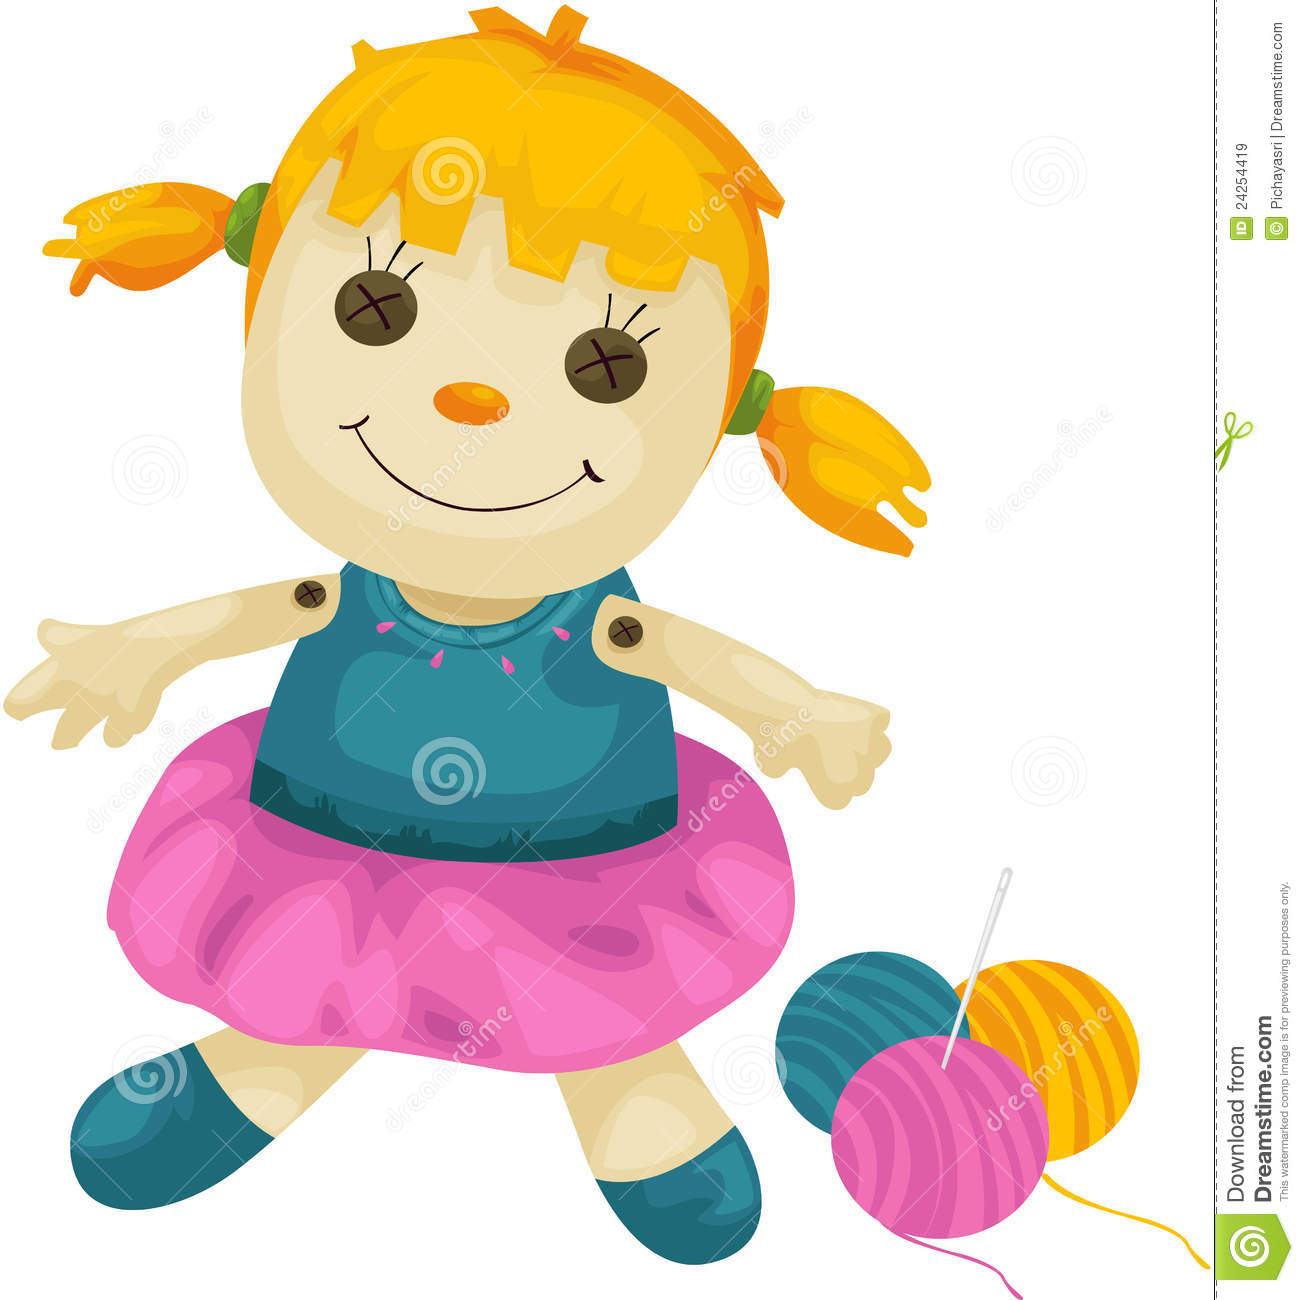 clipart for doll - photo #25